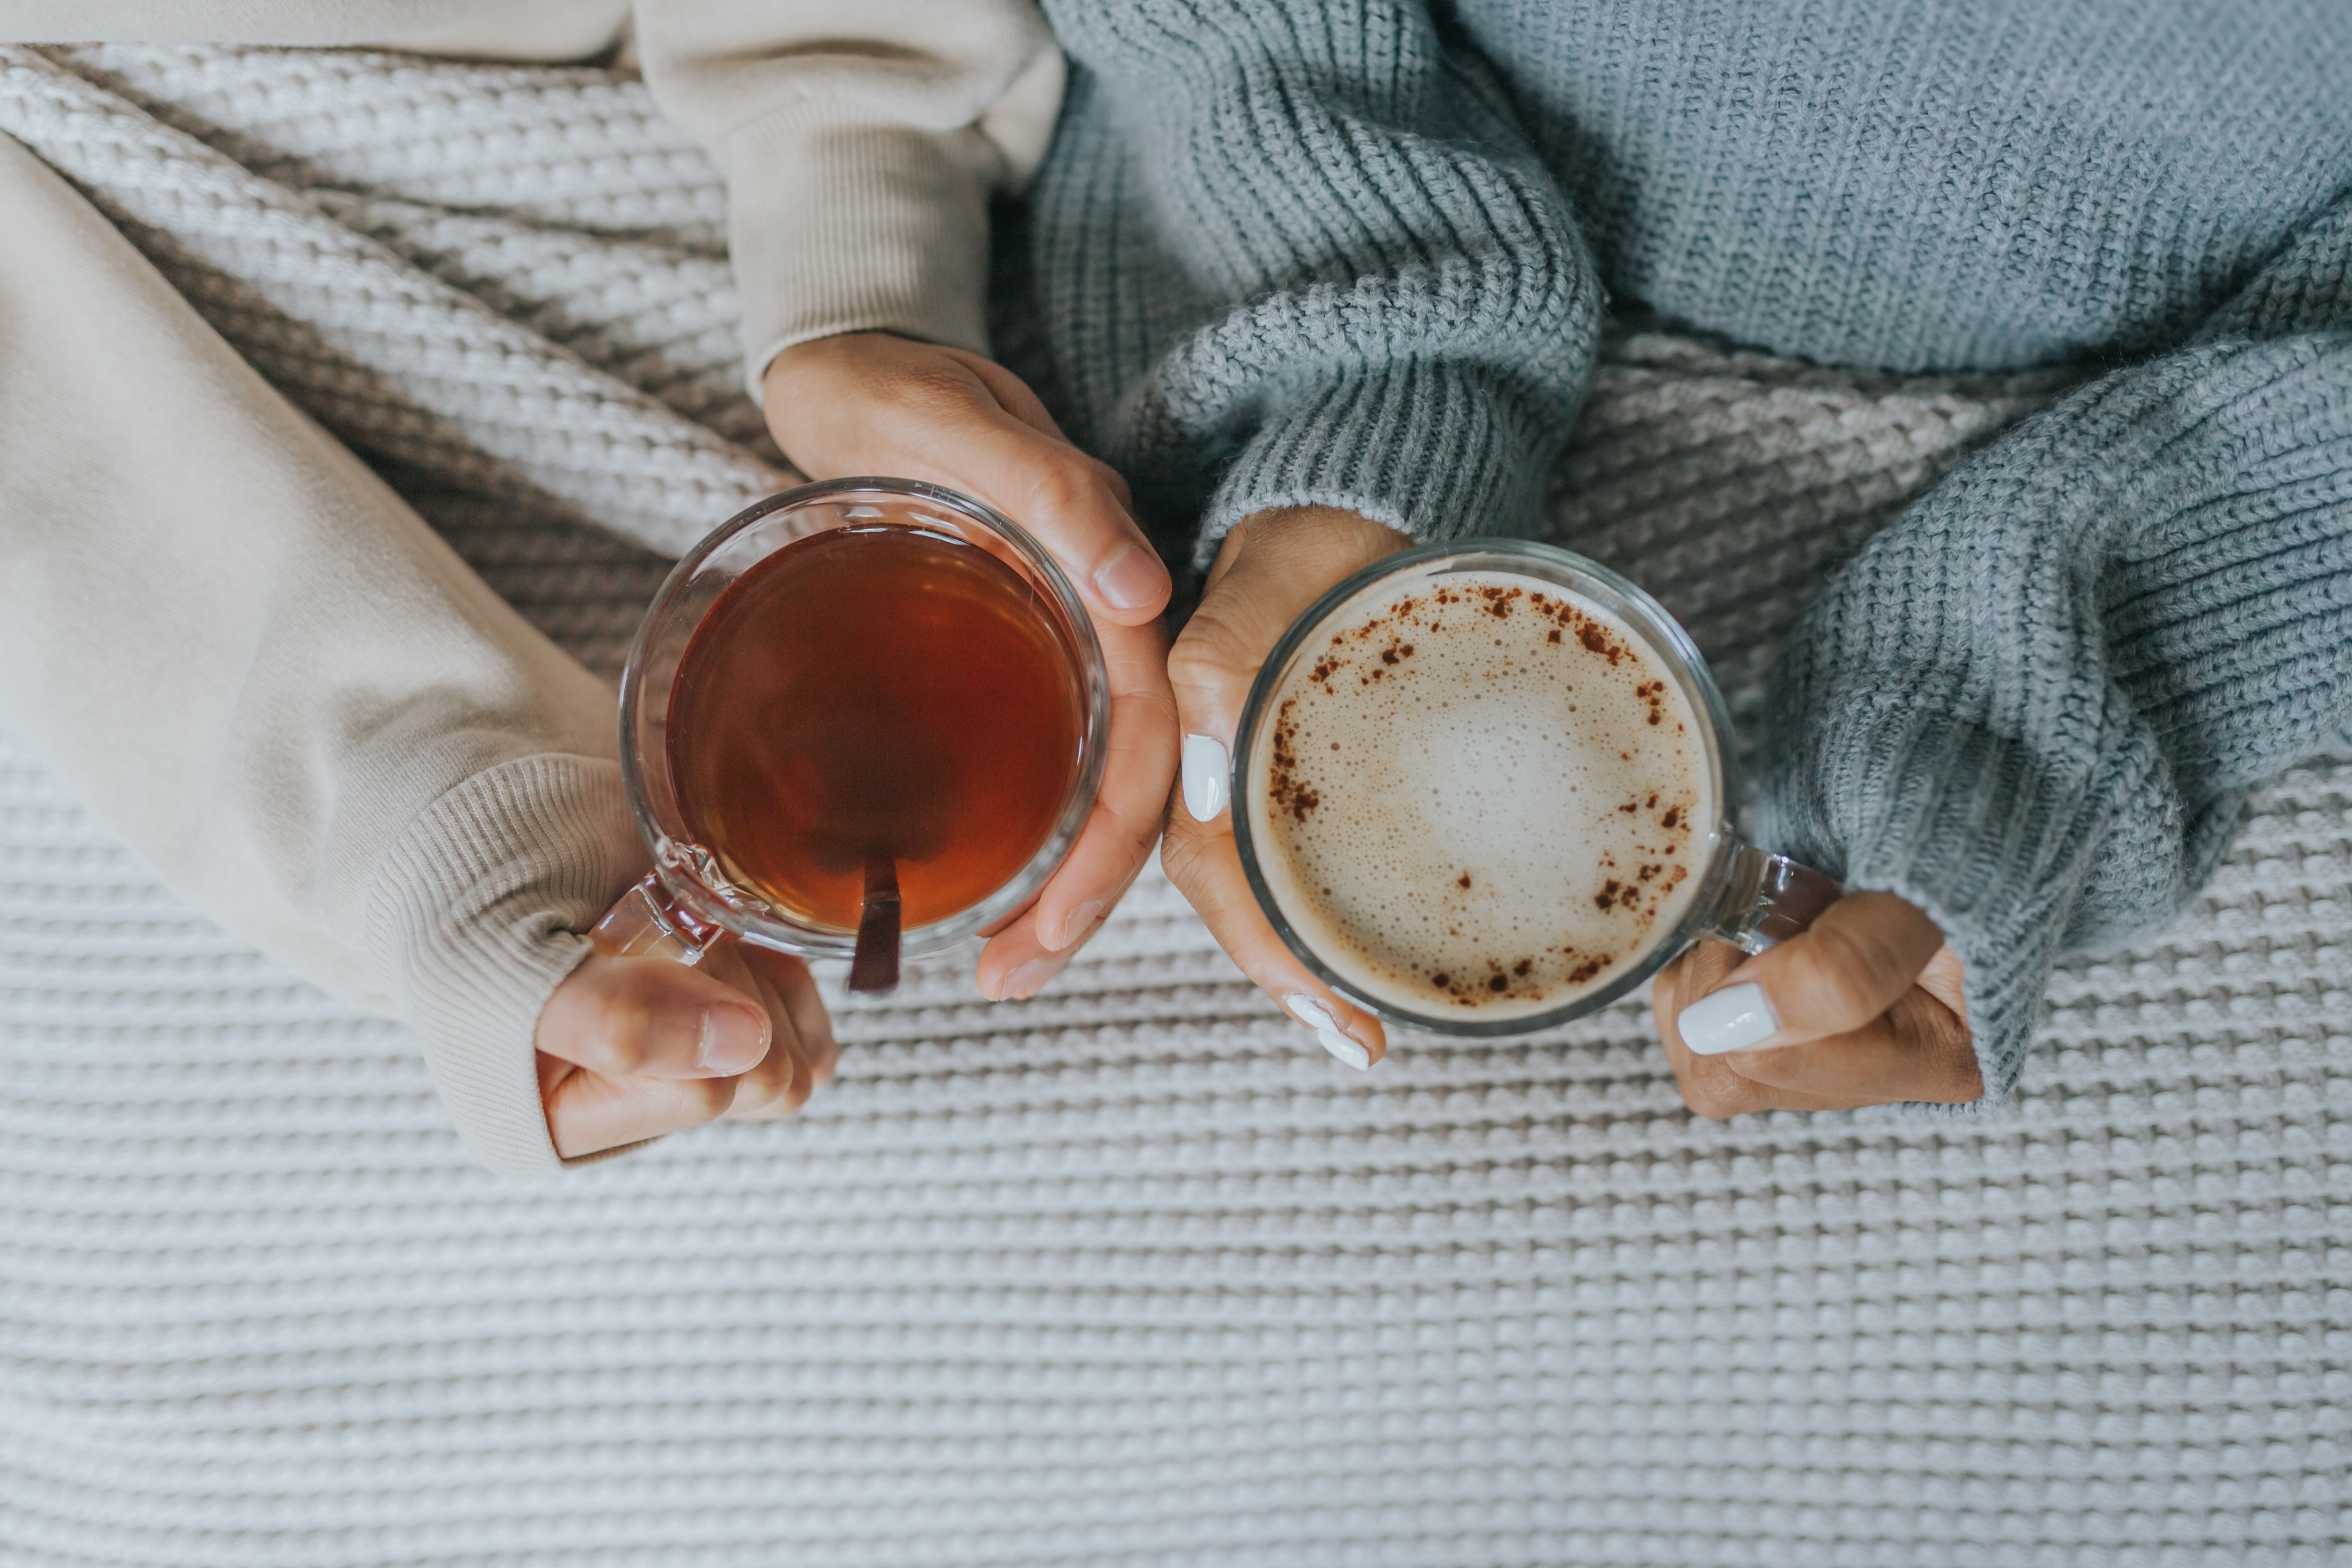 Couple in bed with cozy relaxing teas